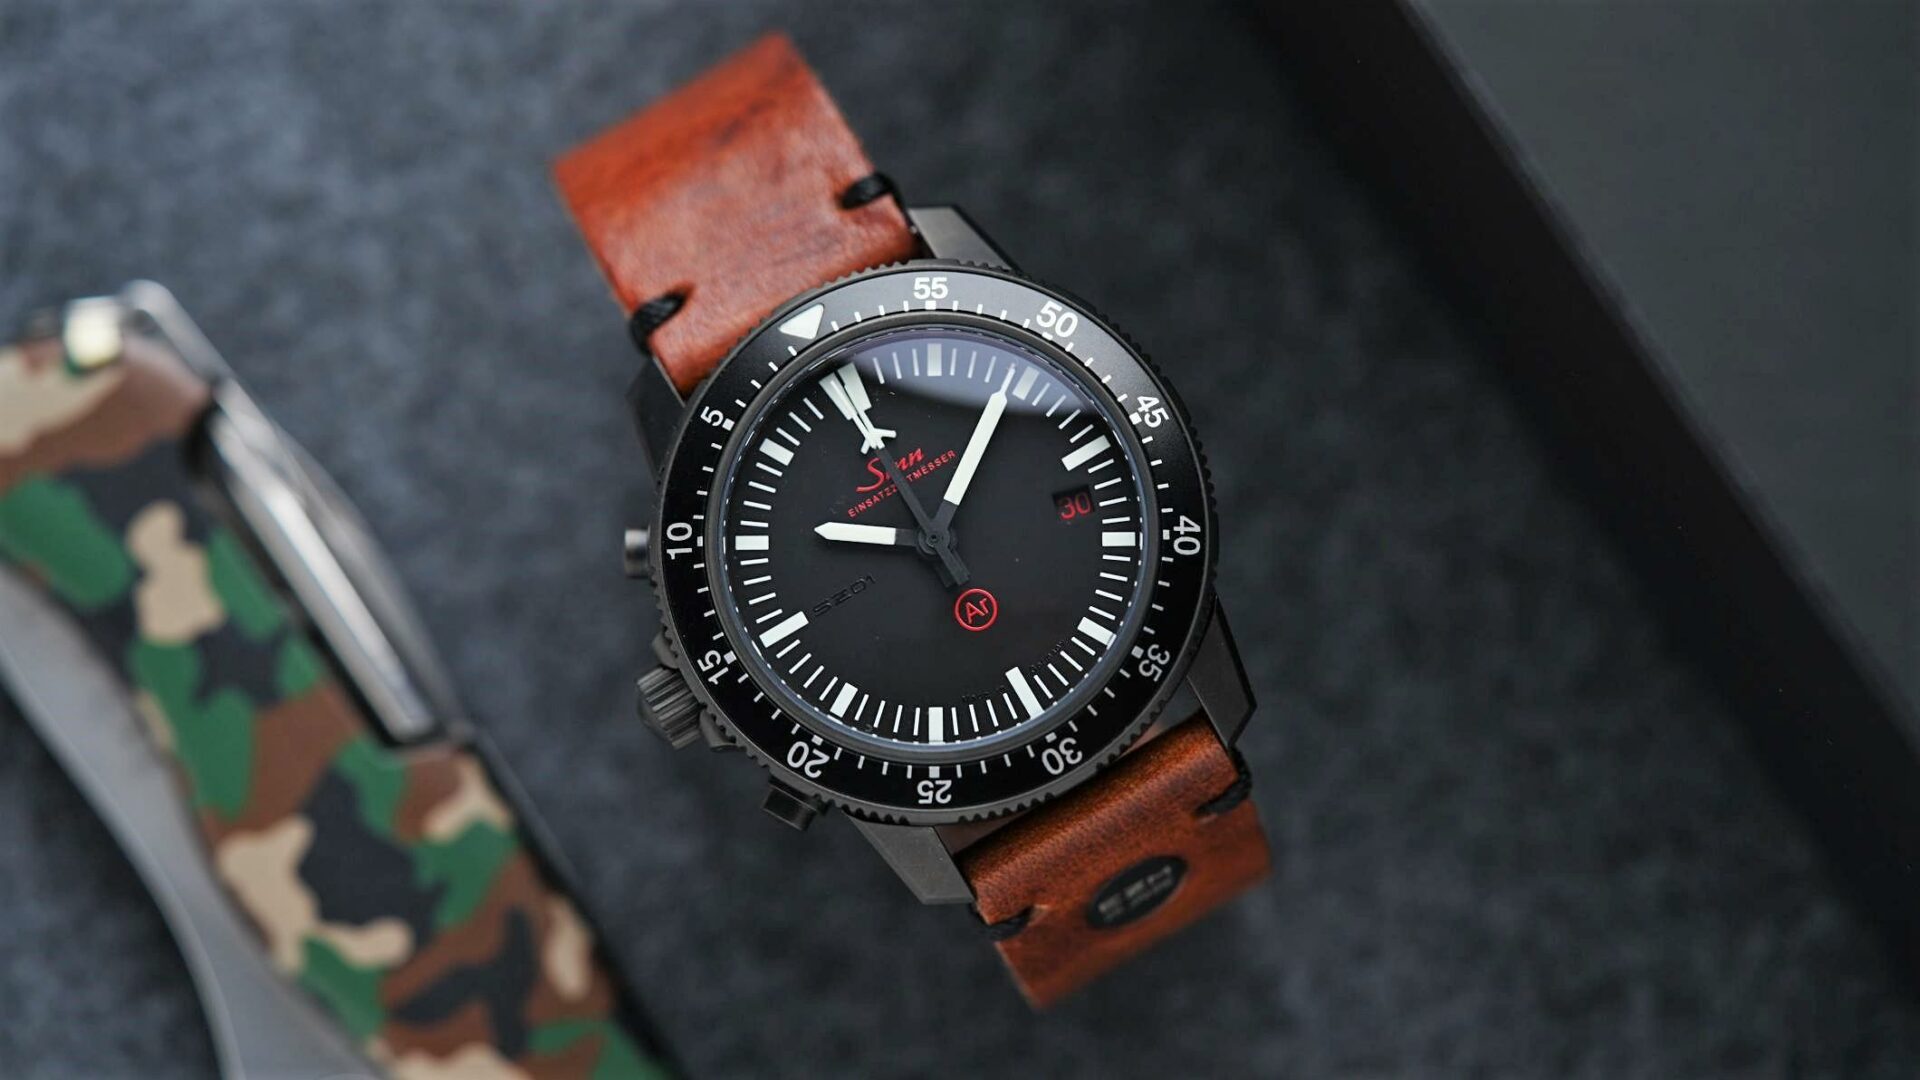 Sinn EZM 1.1S Limited Edition 500 with army knife in background closeup shot.